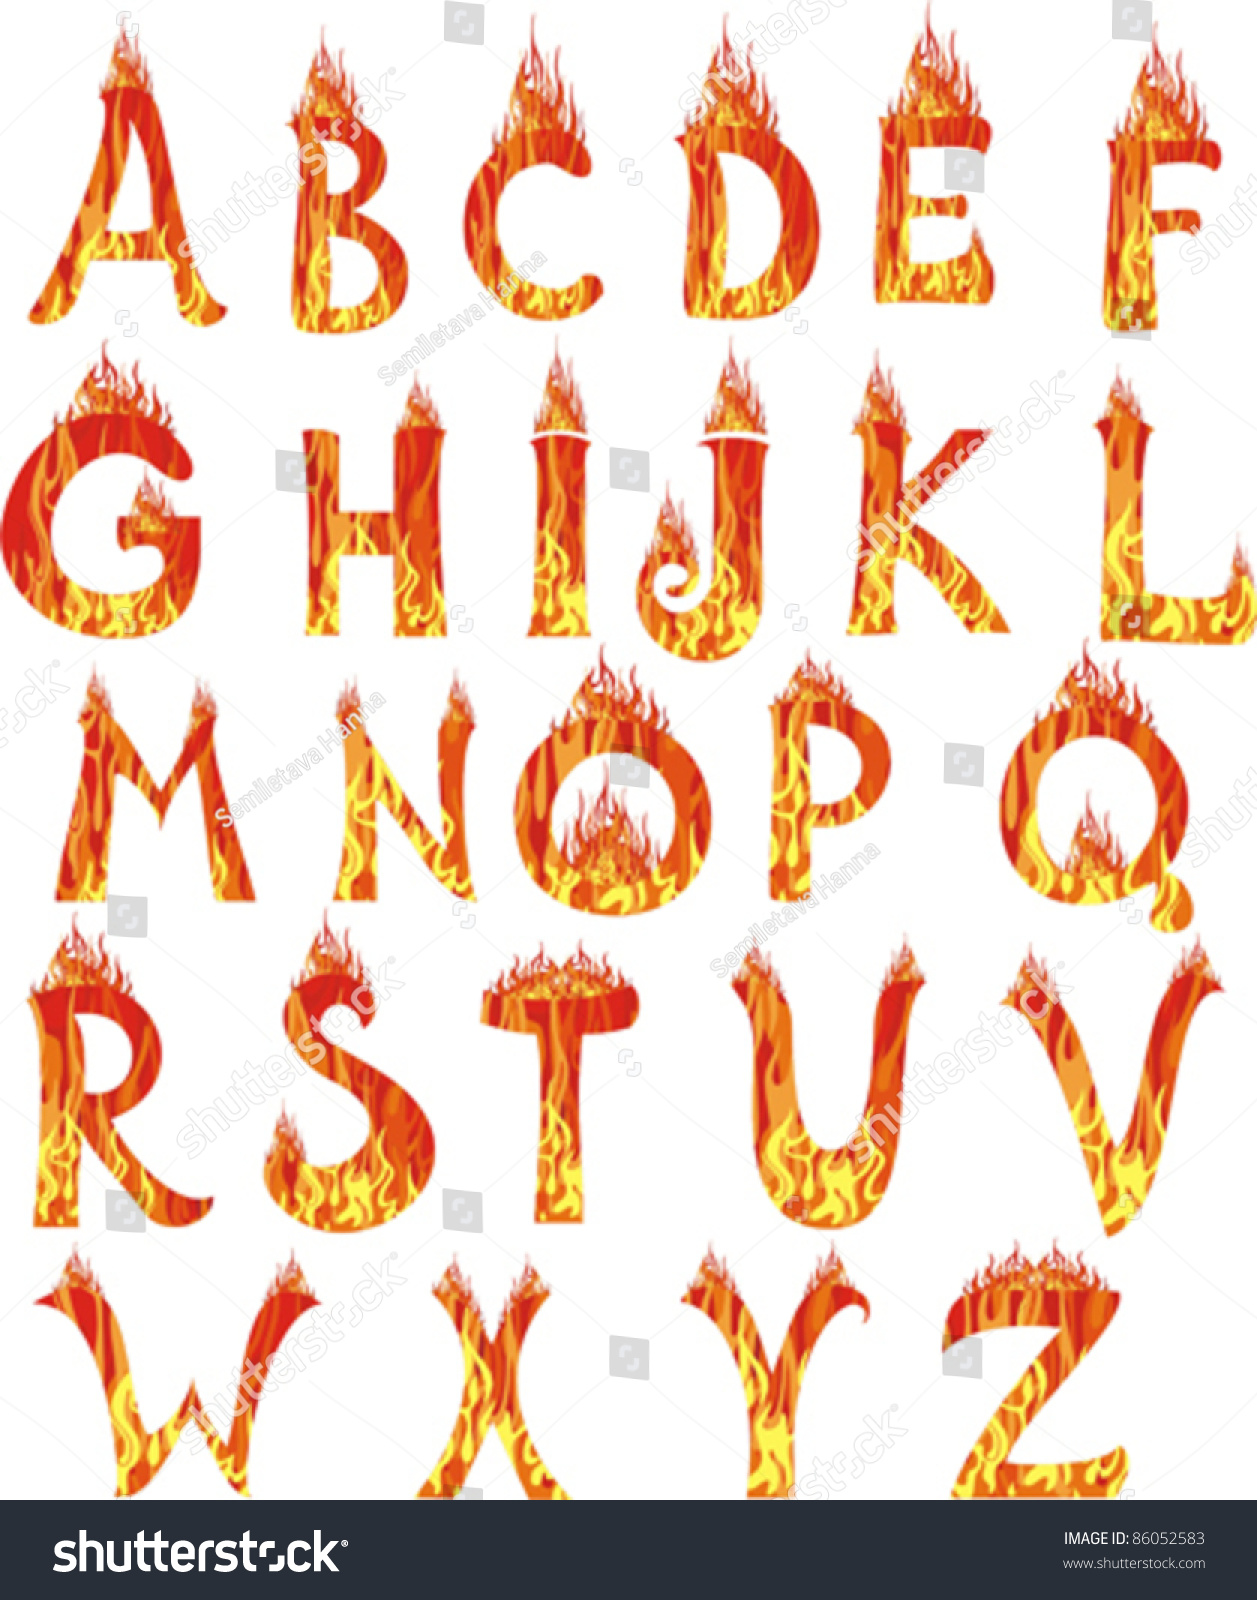 fire text clipart - photo #38